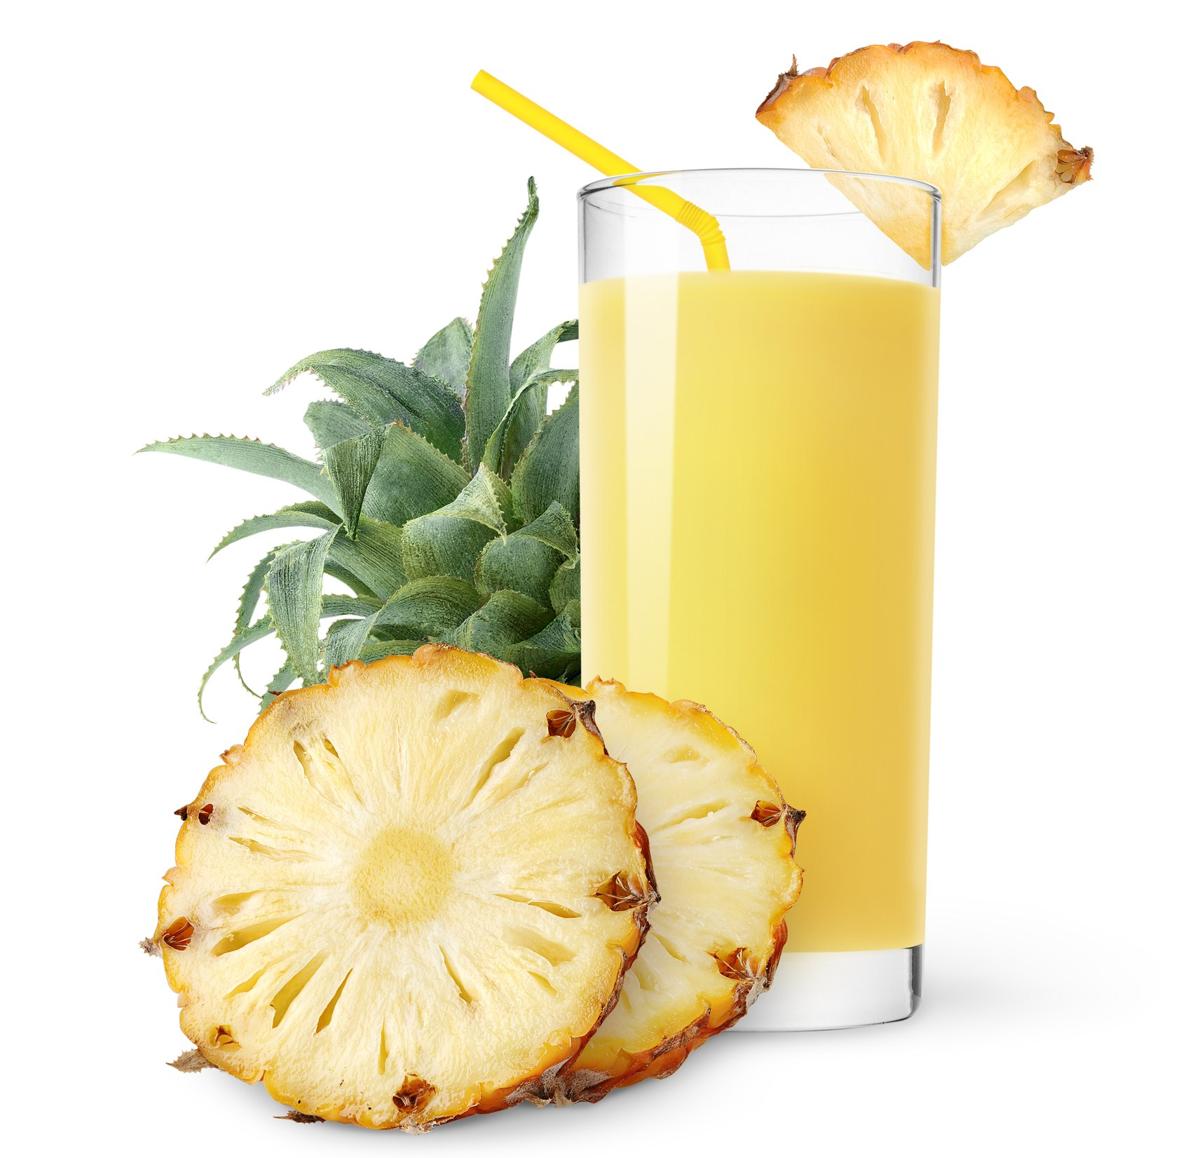 Pineapple juice Images, Stock Photos Fresh Pineapple Juice Recipe (Without ...